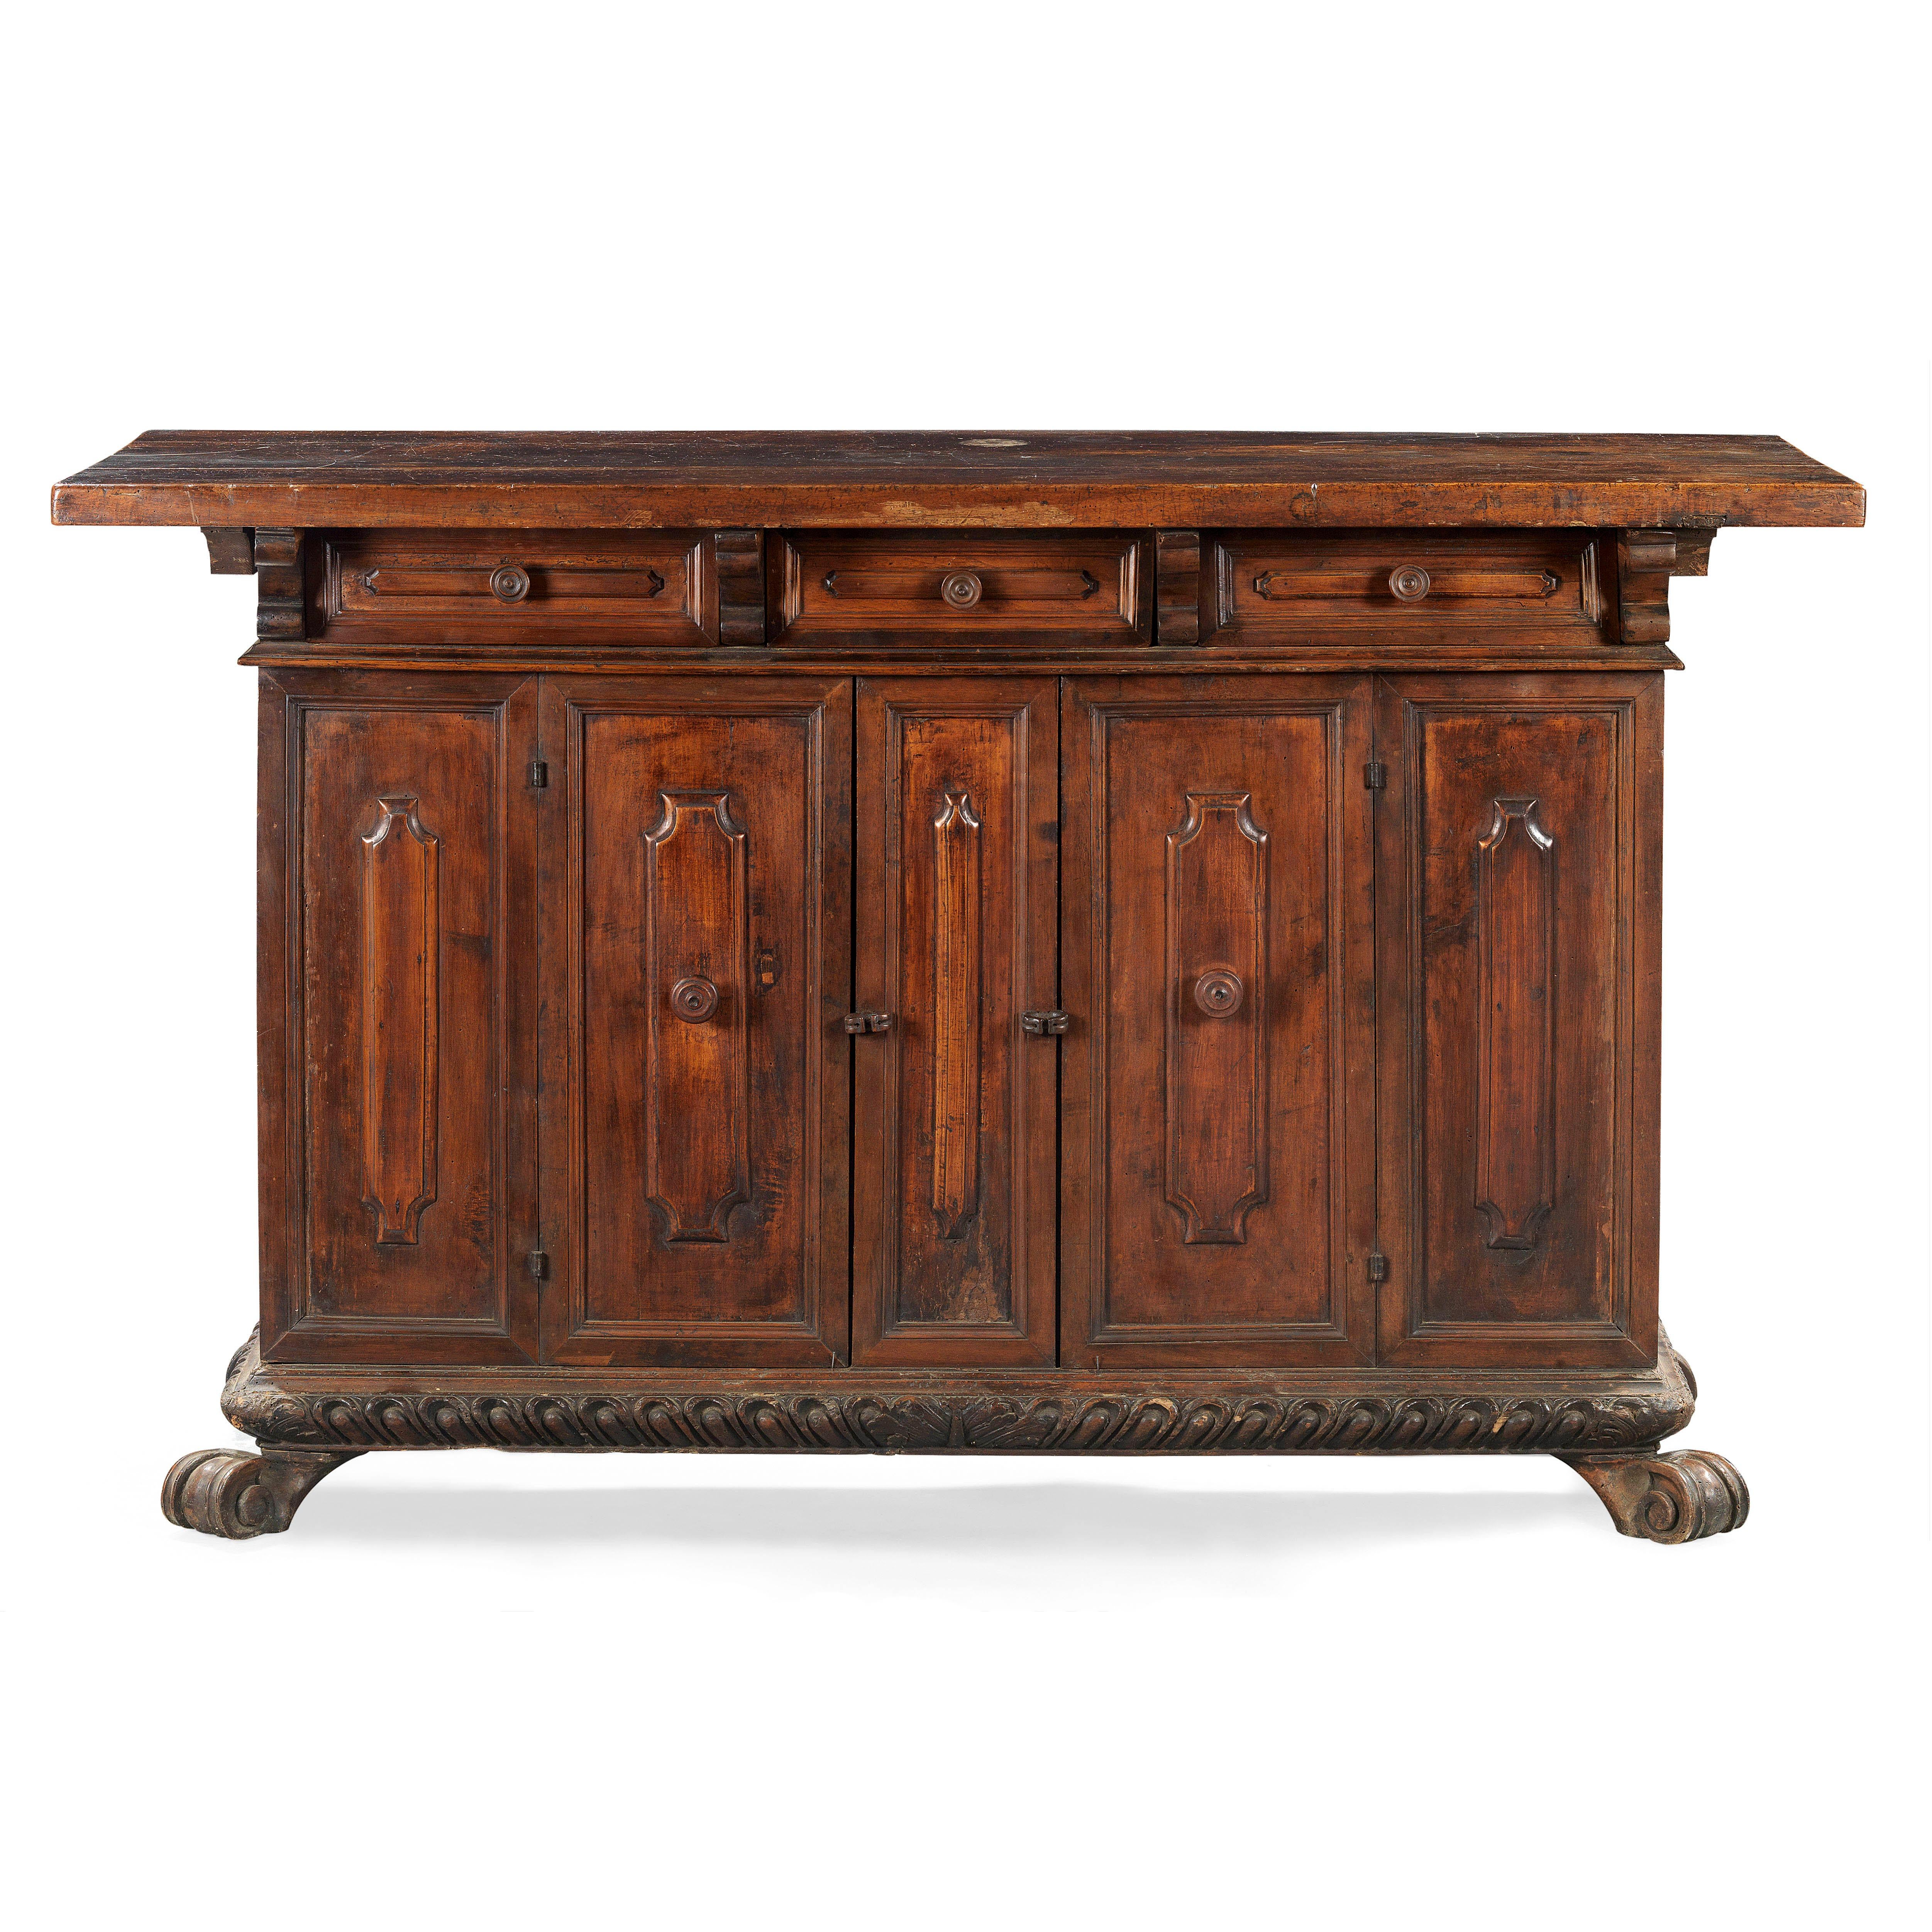 Late 17th Century Italian Carved Credenza in Solid Walnut Wood For Sale 8